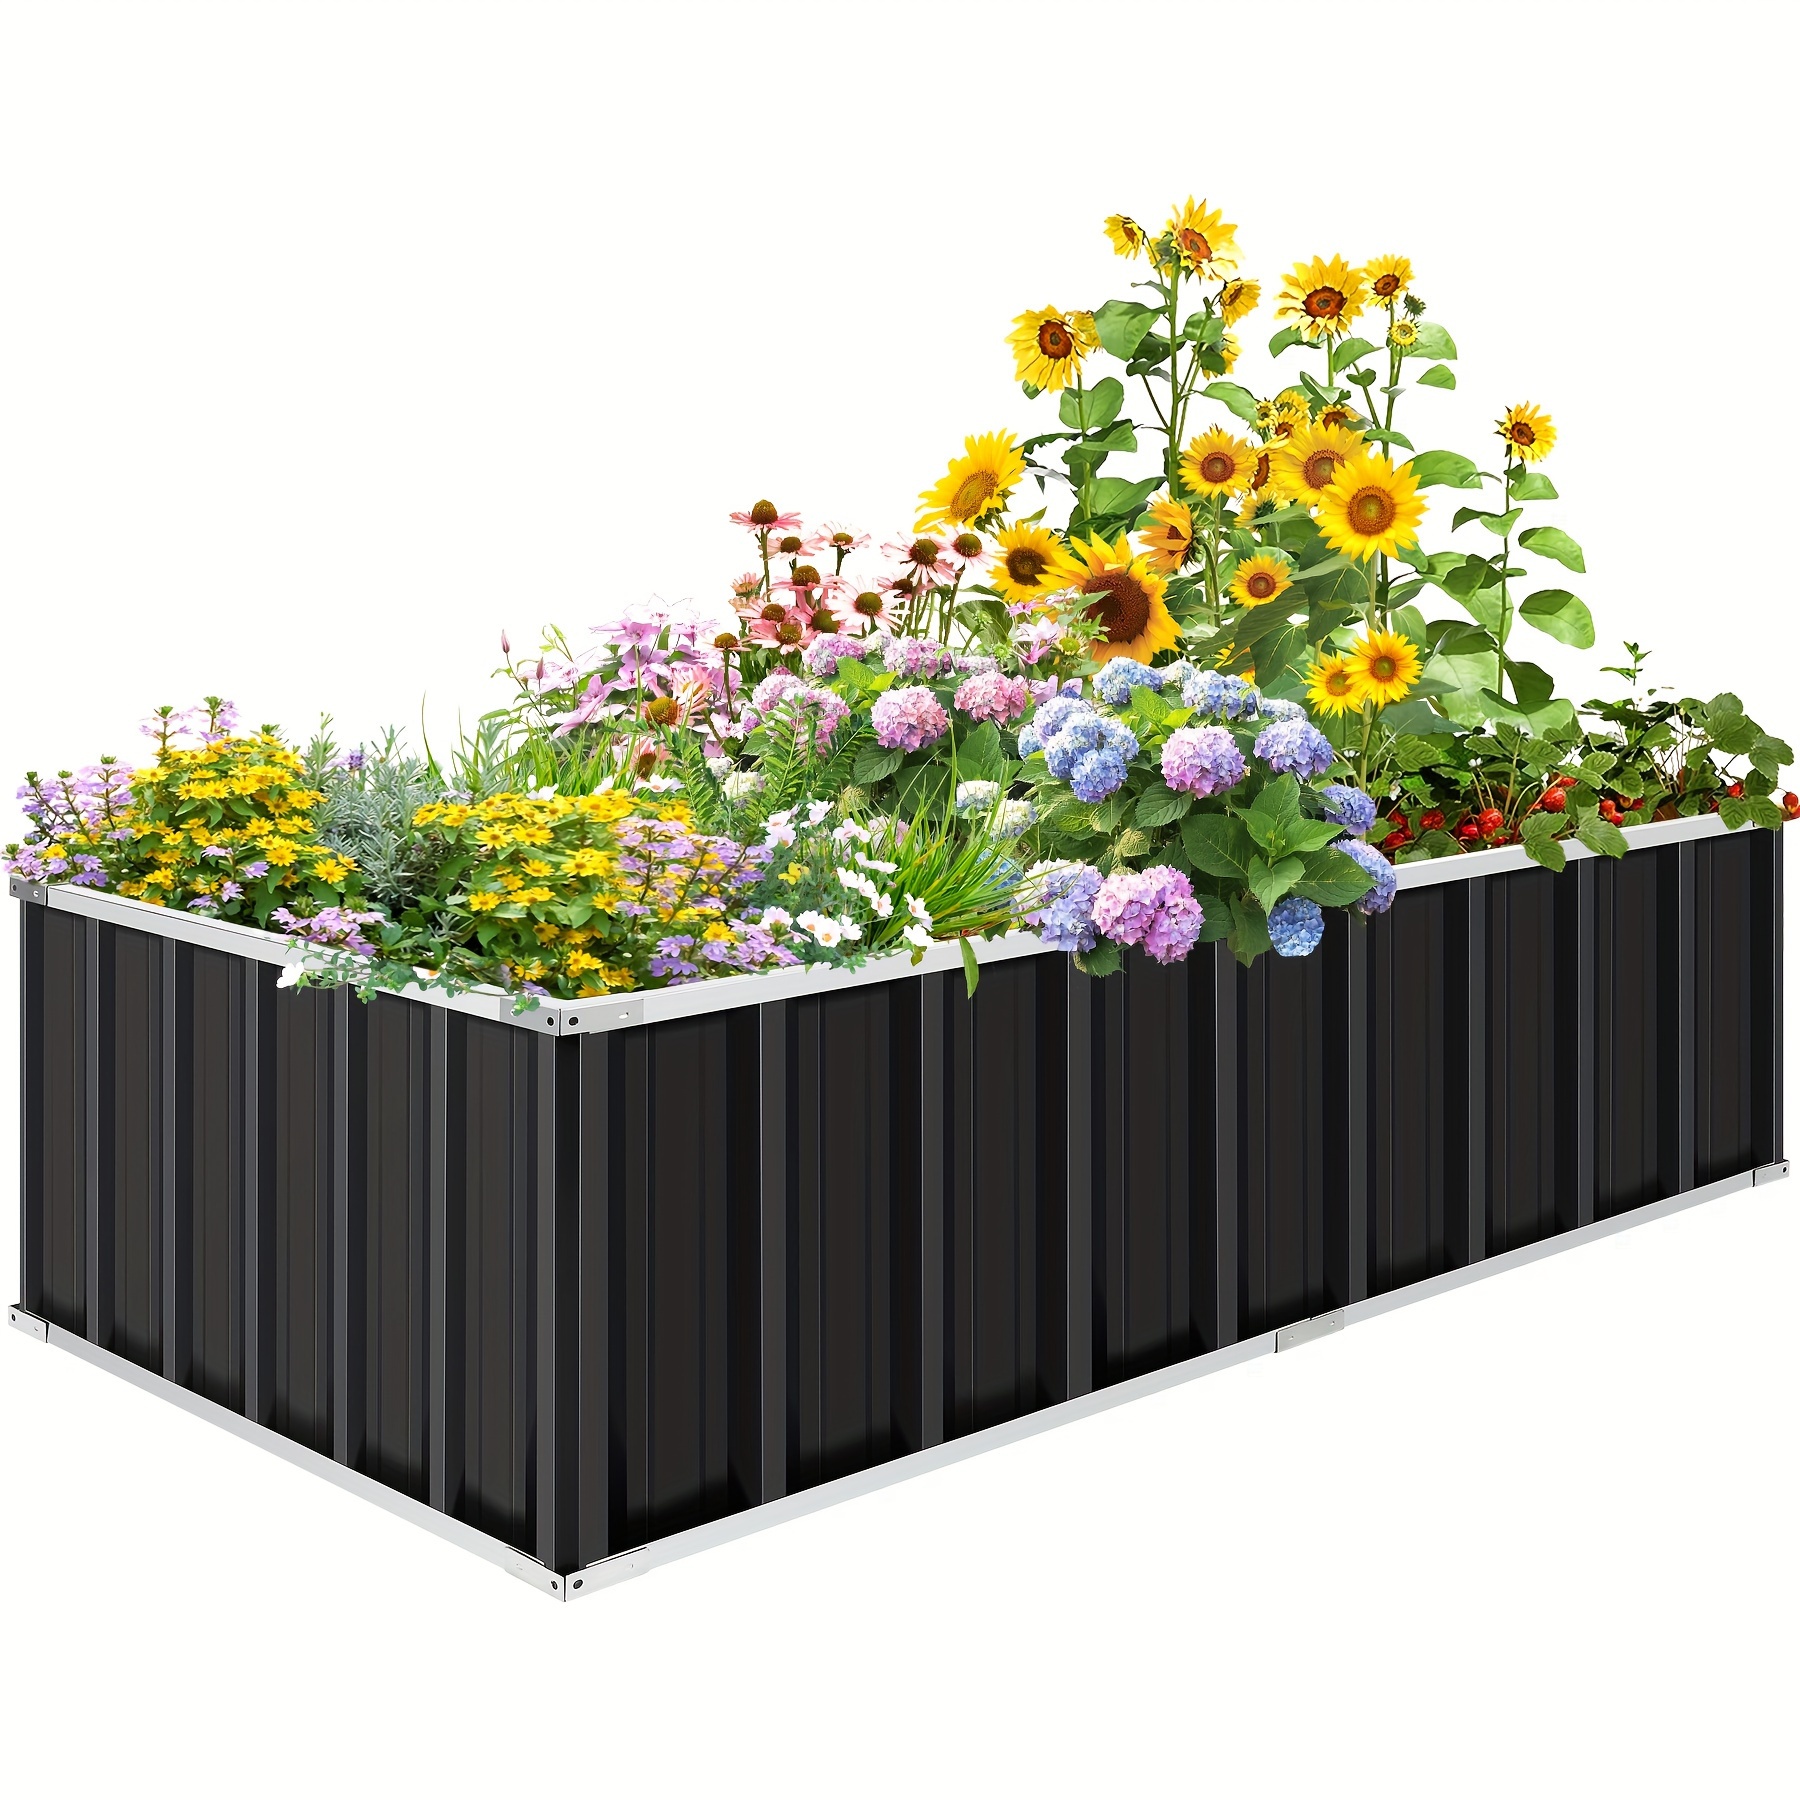 

Metal Patio Raised Garden Bed, Outdoor Flower Pot Planting Box, Removable Frame, Suitable For Vegetables, Flowers, Green Plants 5.6ftx3ftx1.5ft